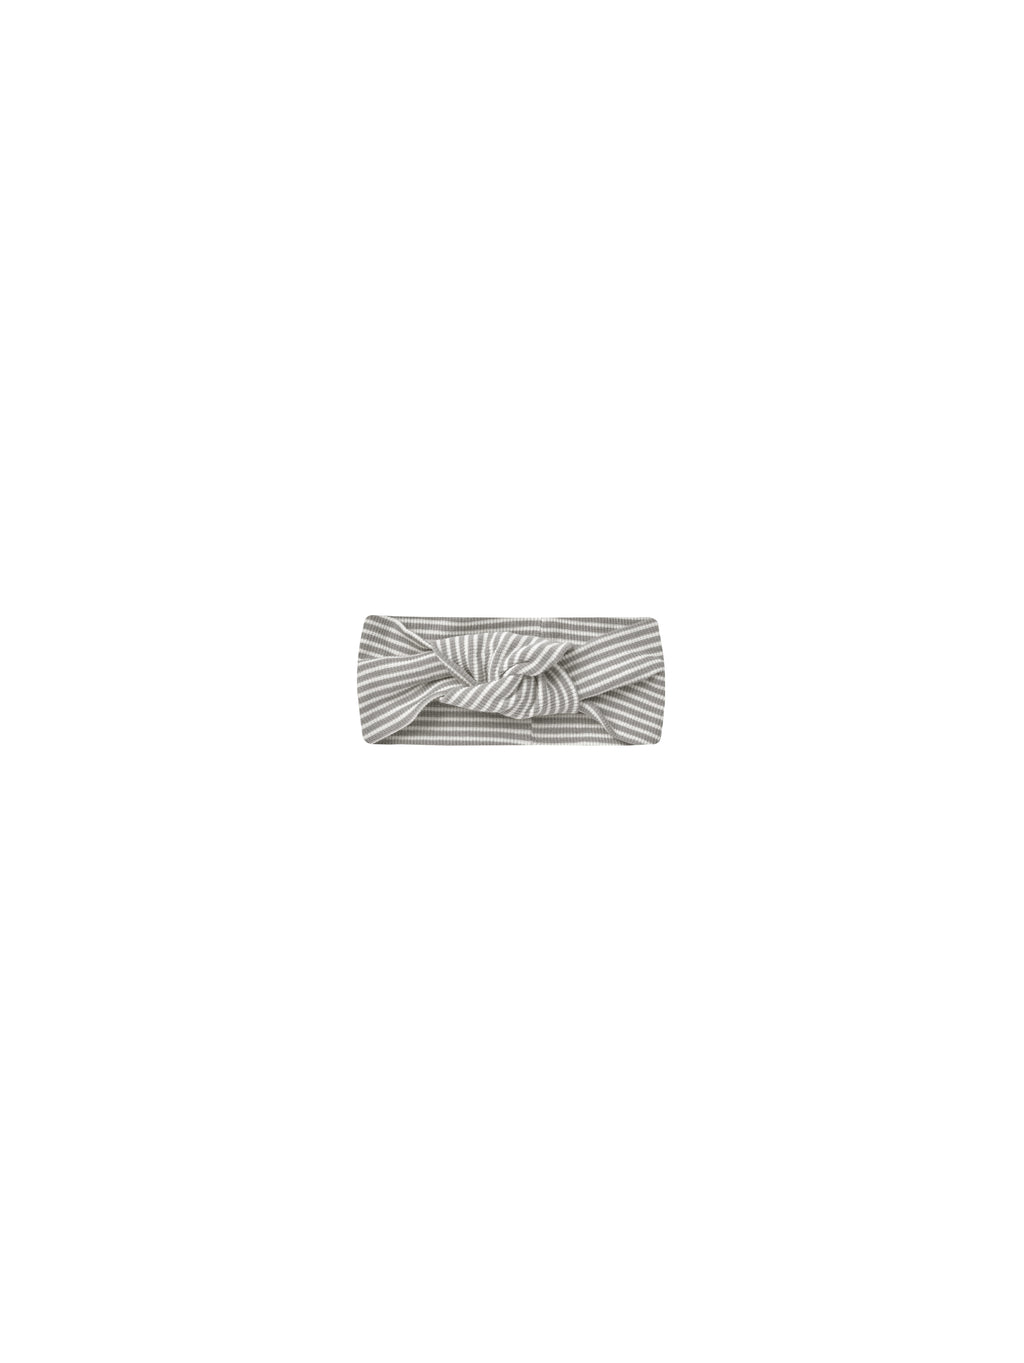 Quincy Mae Ribbed Knotted Headband - Lagoon Micro Stripe